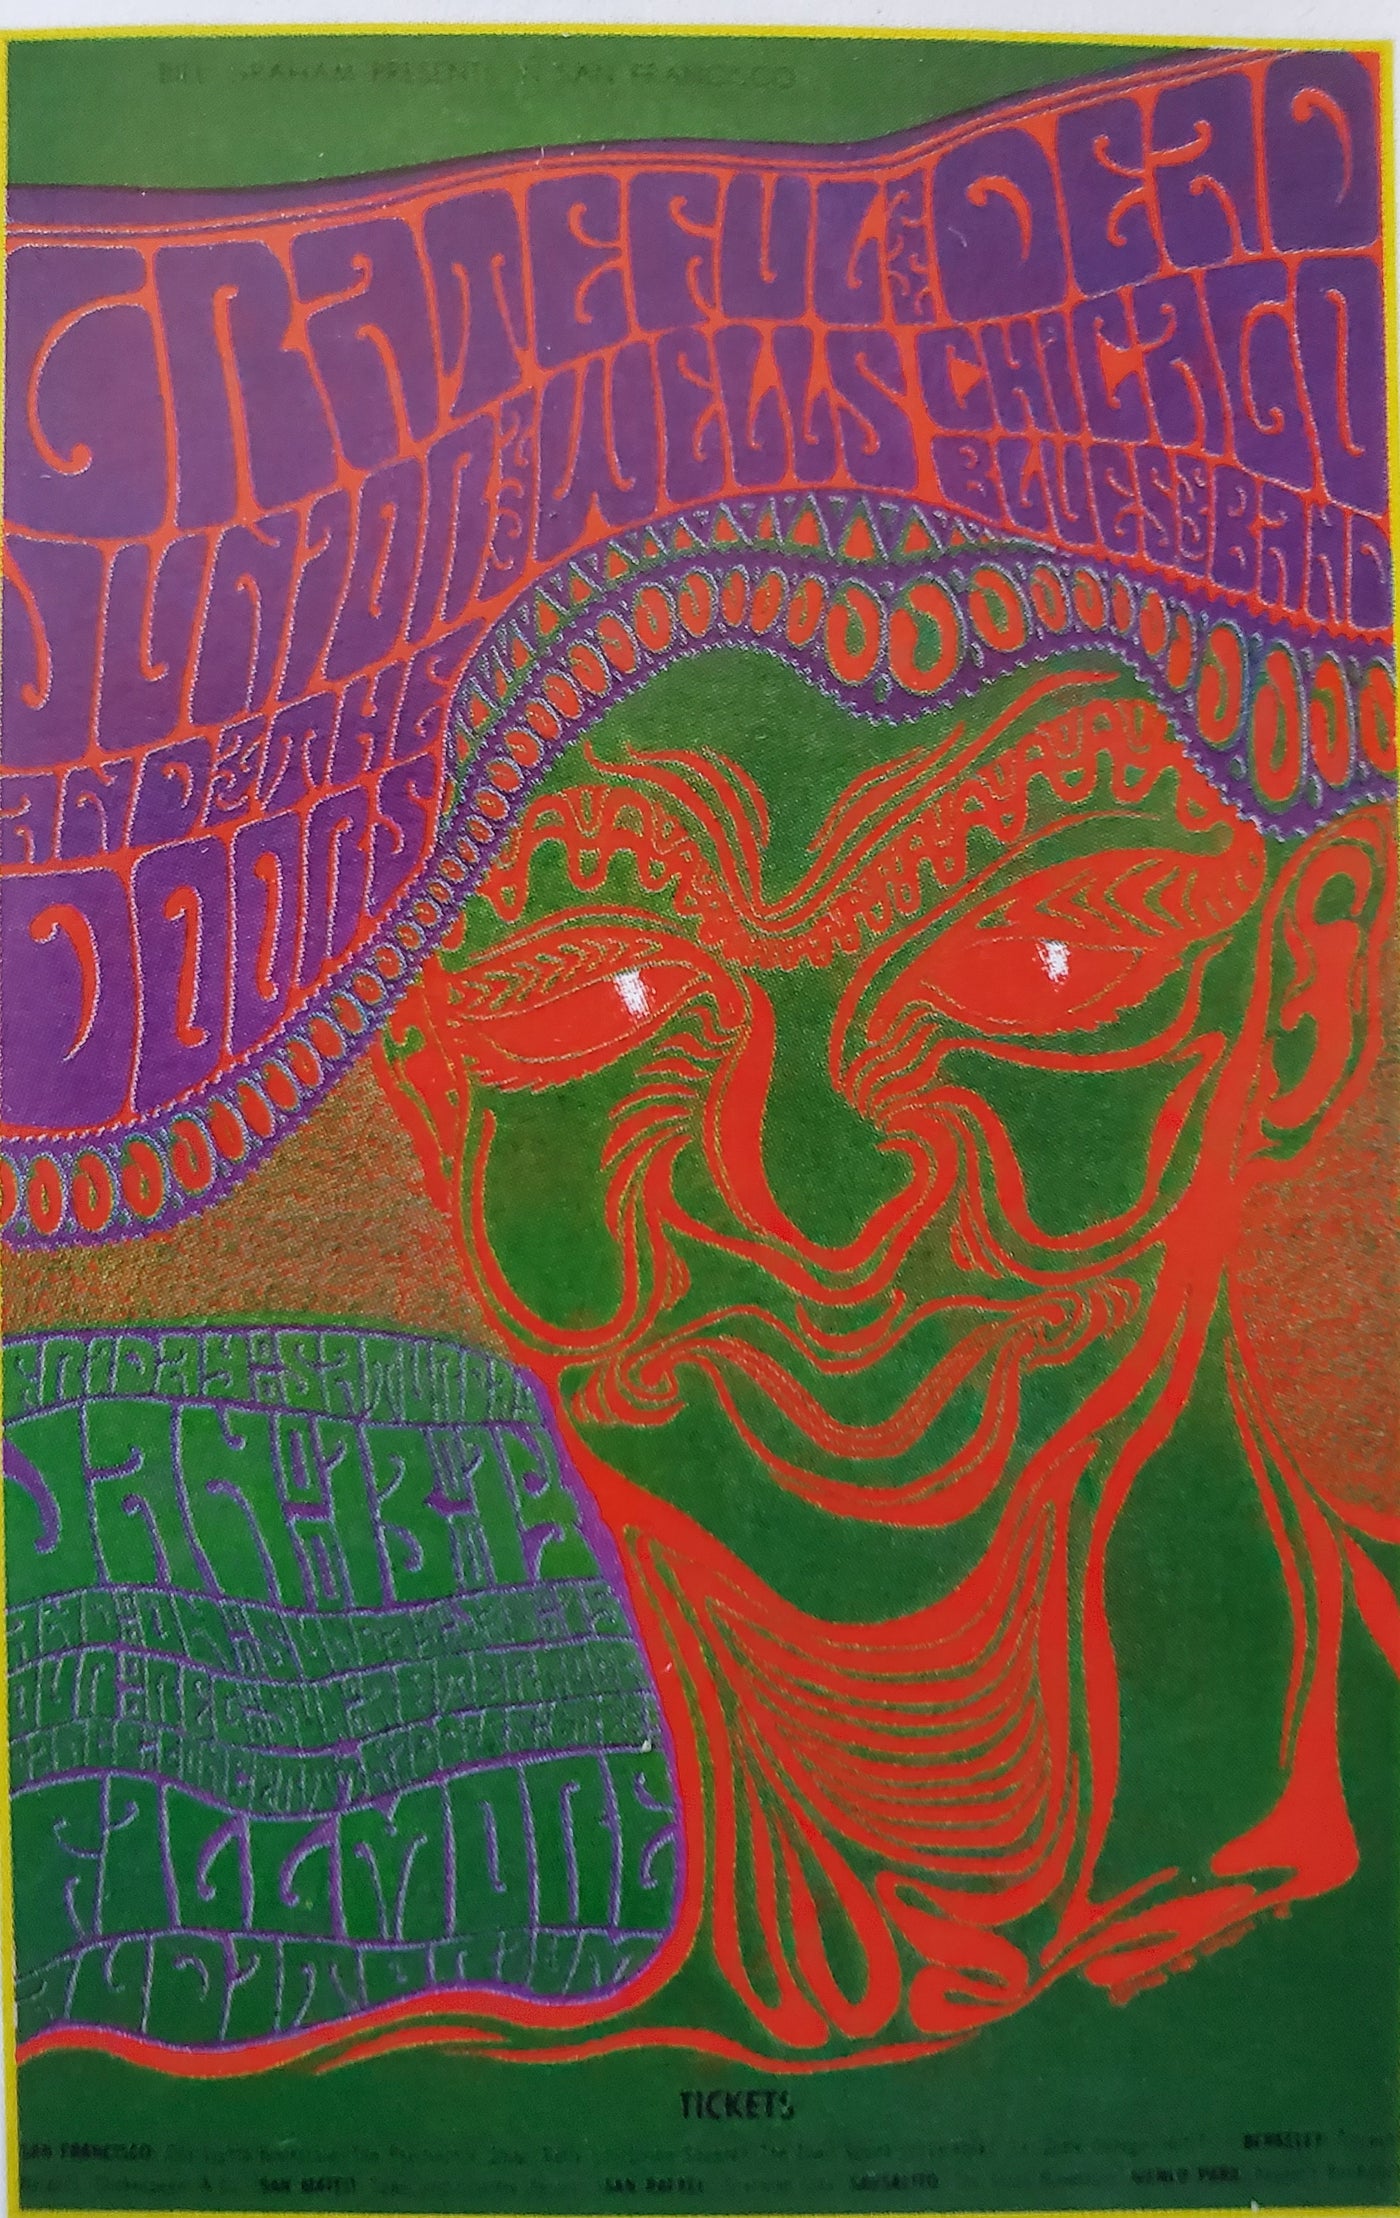 Afterthought Poster 283 The Grateful Dead/Jason Wells/Chicago